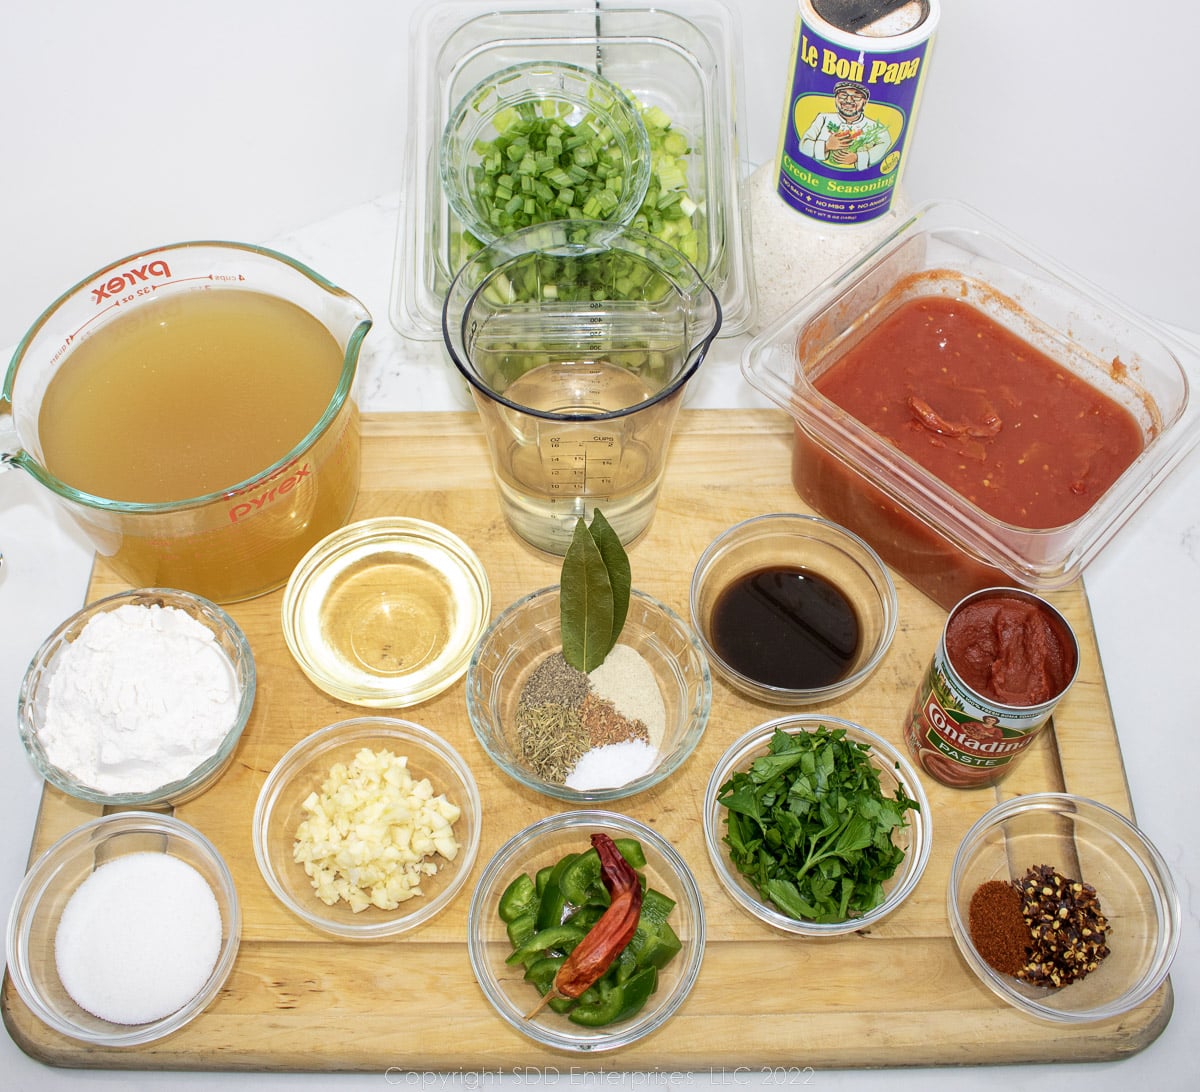 prepared ingredients for sauce piquante